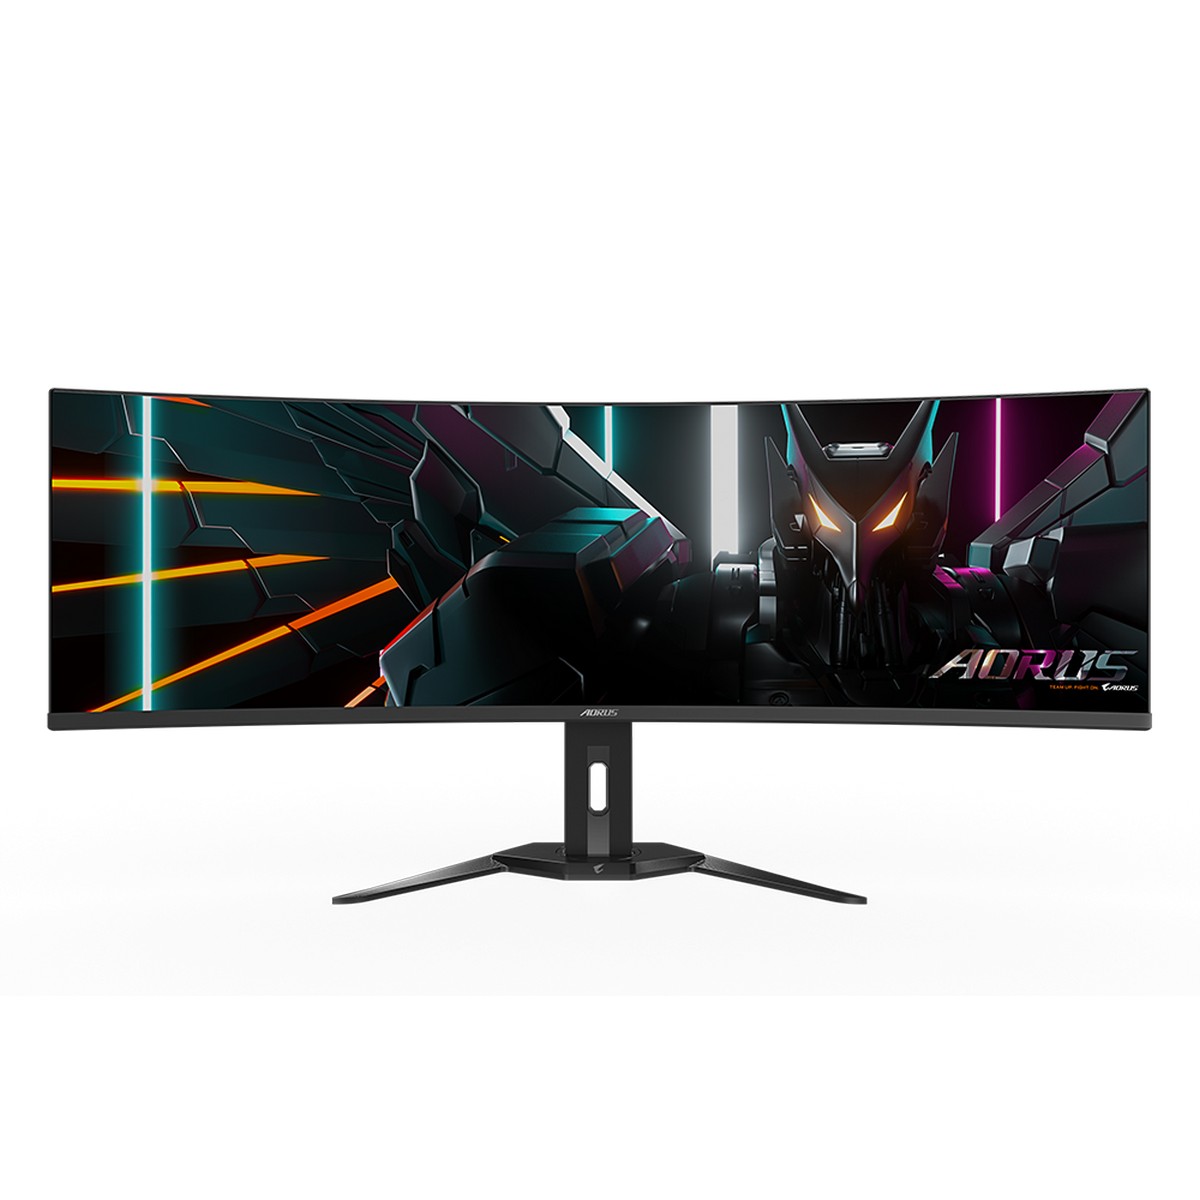 Gigabyte 49" CO49DQ 5120x1440 OLED 144Hz 0.03ms HDMI 2.1 Ultrawide Curved Gaming Monitor